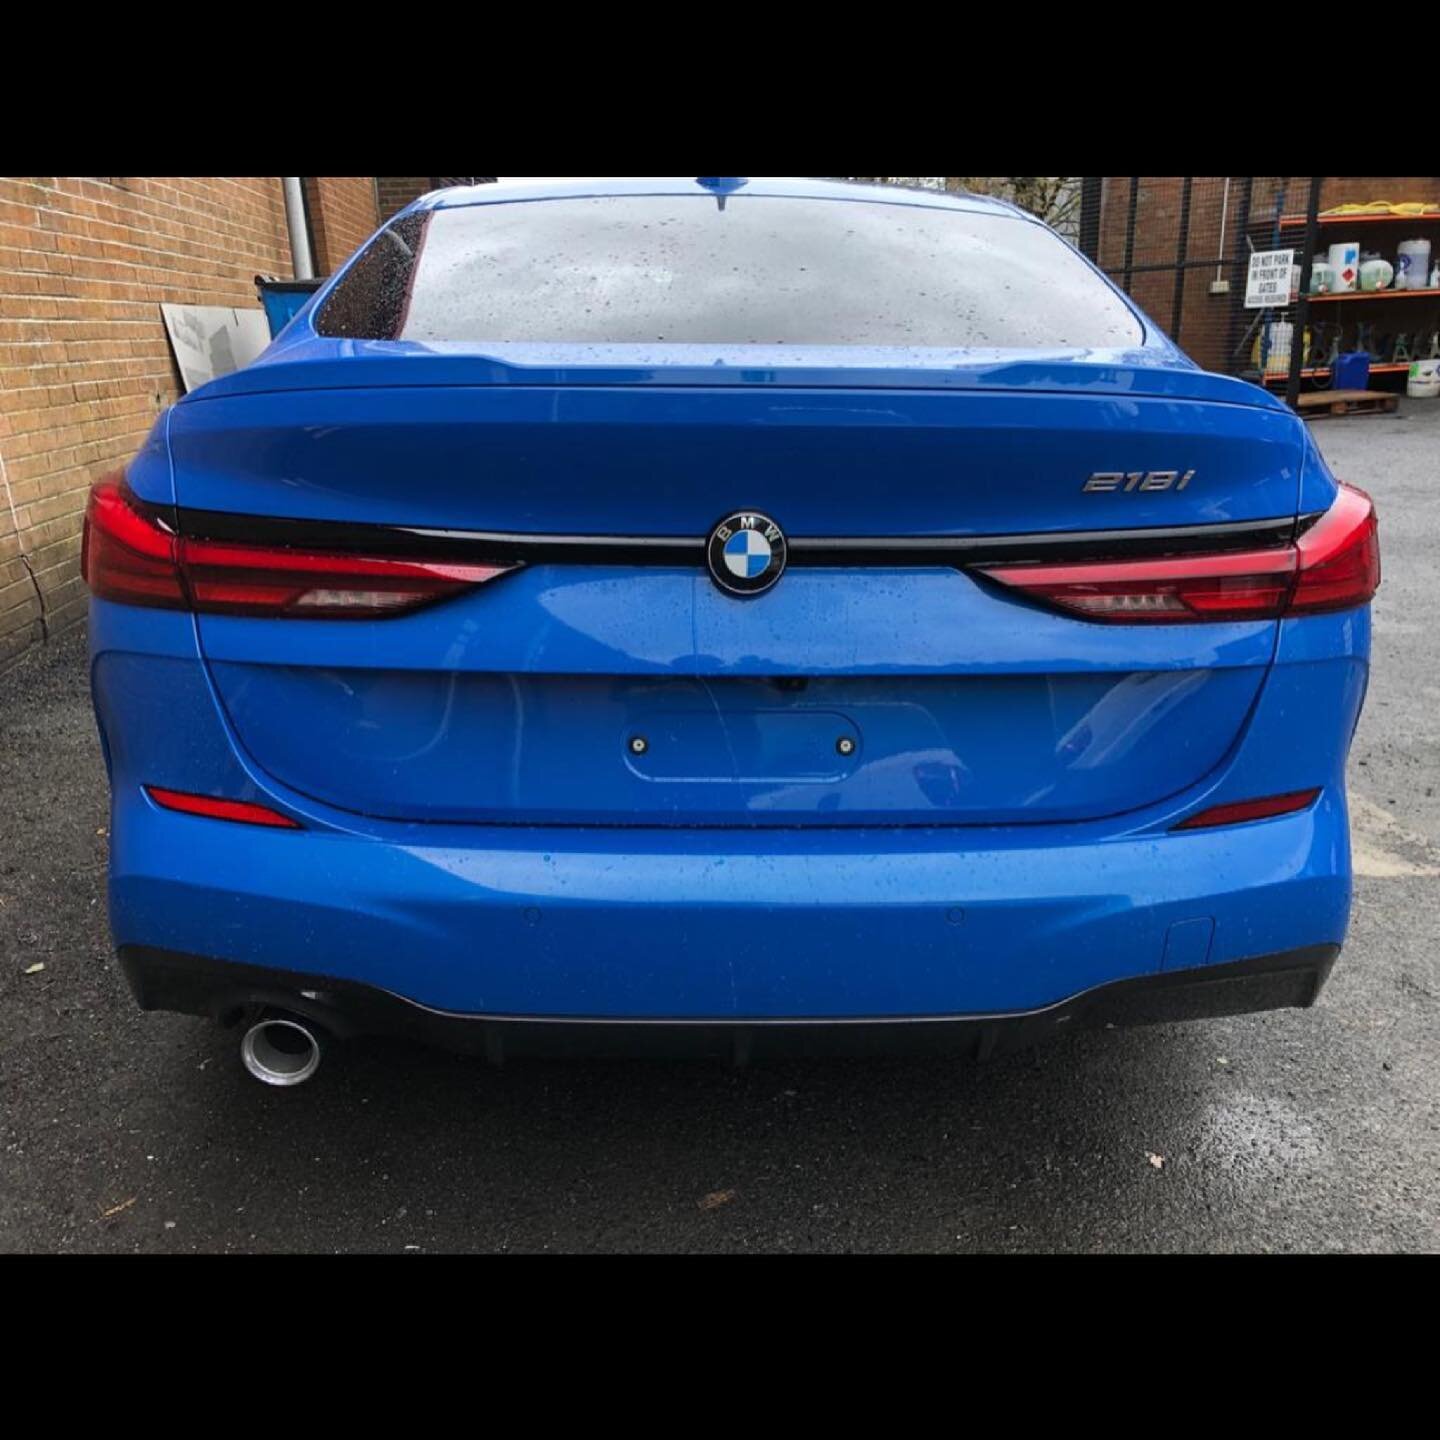 BMW 2 Series Boot Spoiler Painted &amp; Fitted. 
#thebodystopni
#BMW
#BMW2Series
#bootspoiler